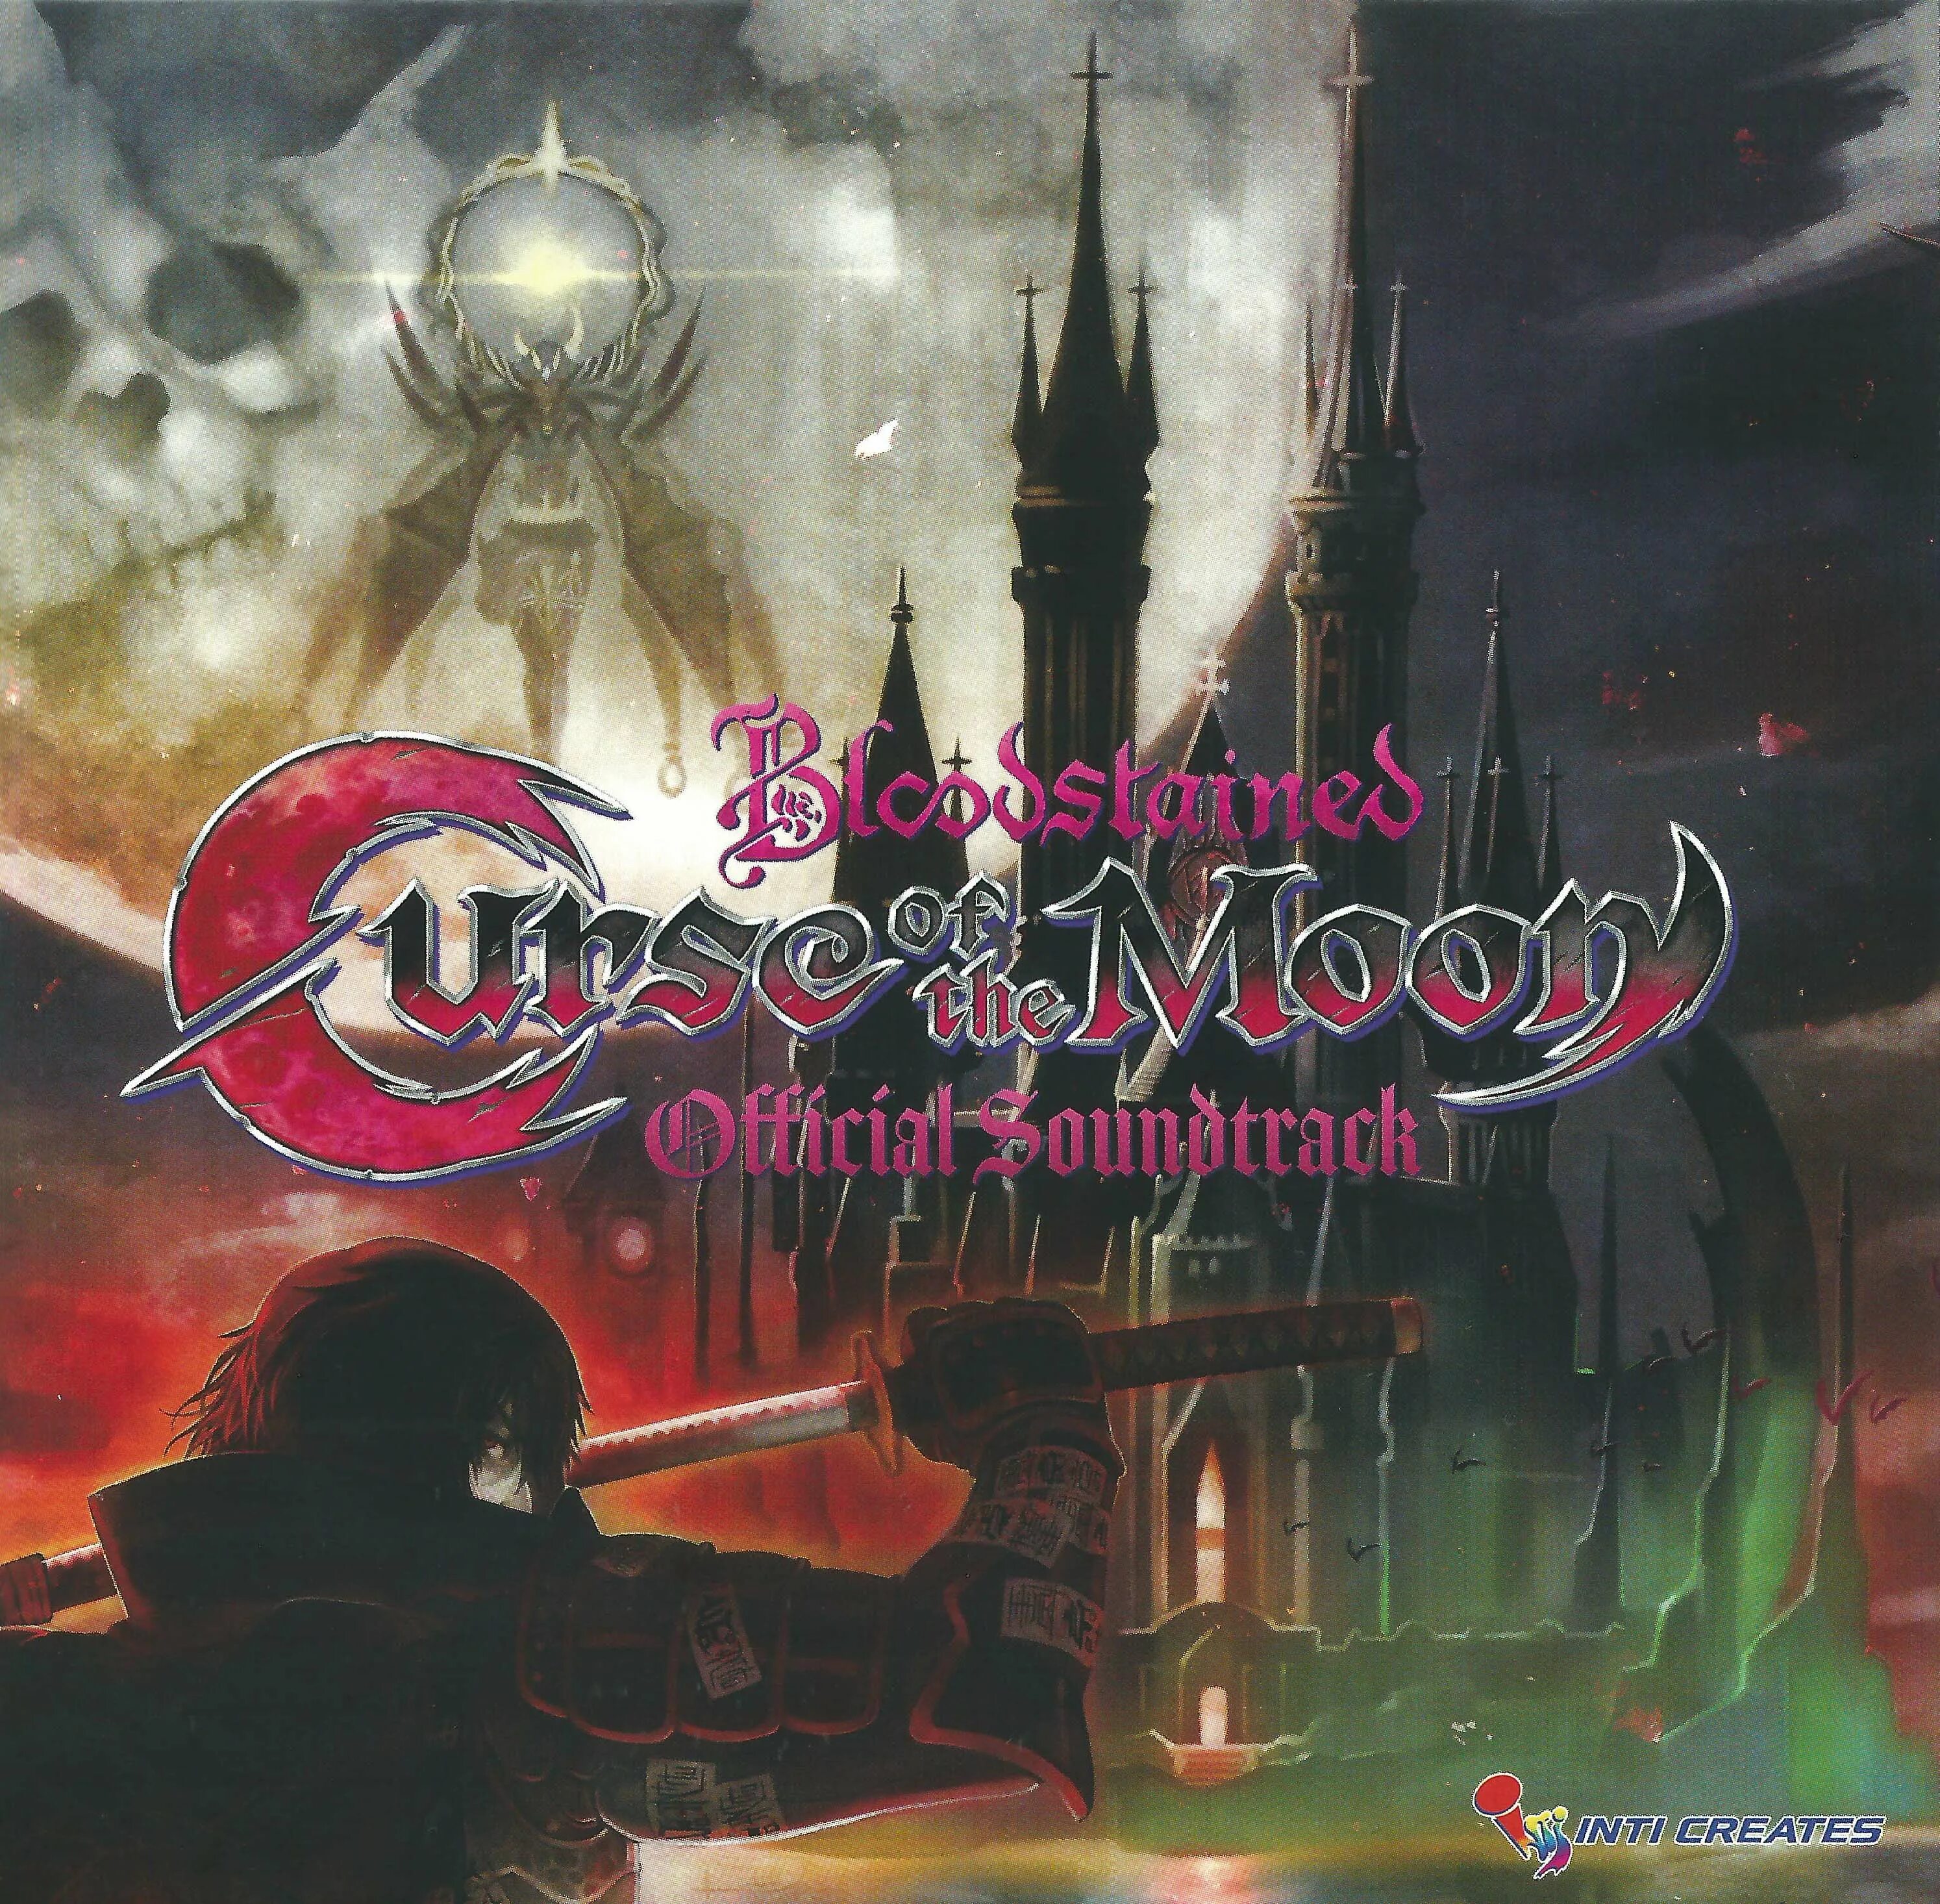 Mooned soundtrack. Bloodstained: Curse of the Moon обложка. Bloodstained Curse of the Moon. Обложка альбома Curse Curse. Картинка Bloodstained: Curse of the Moon.